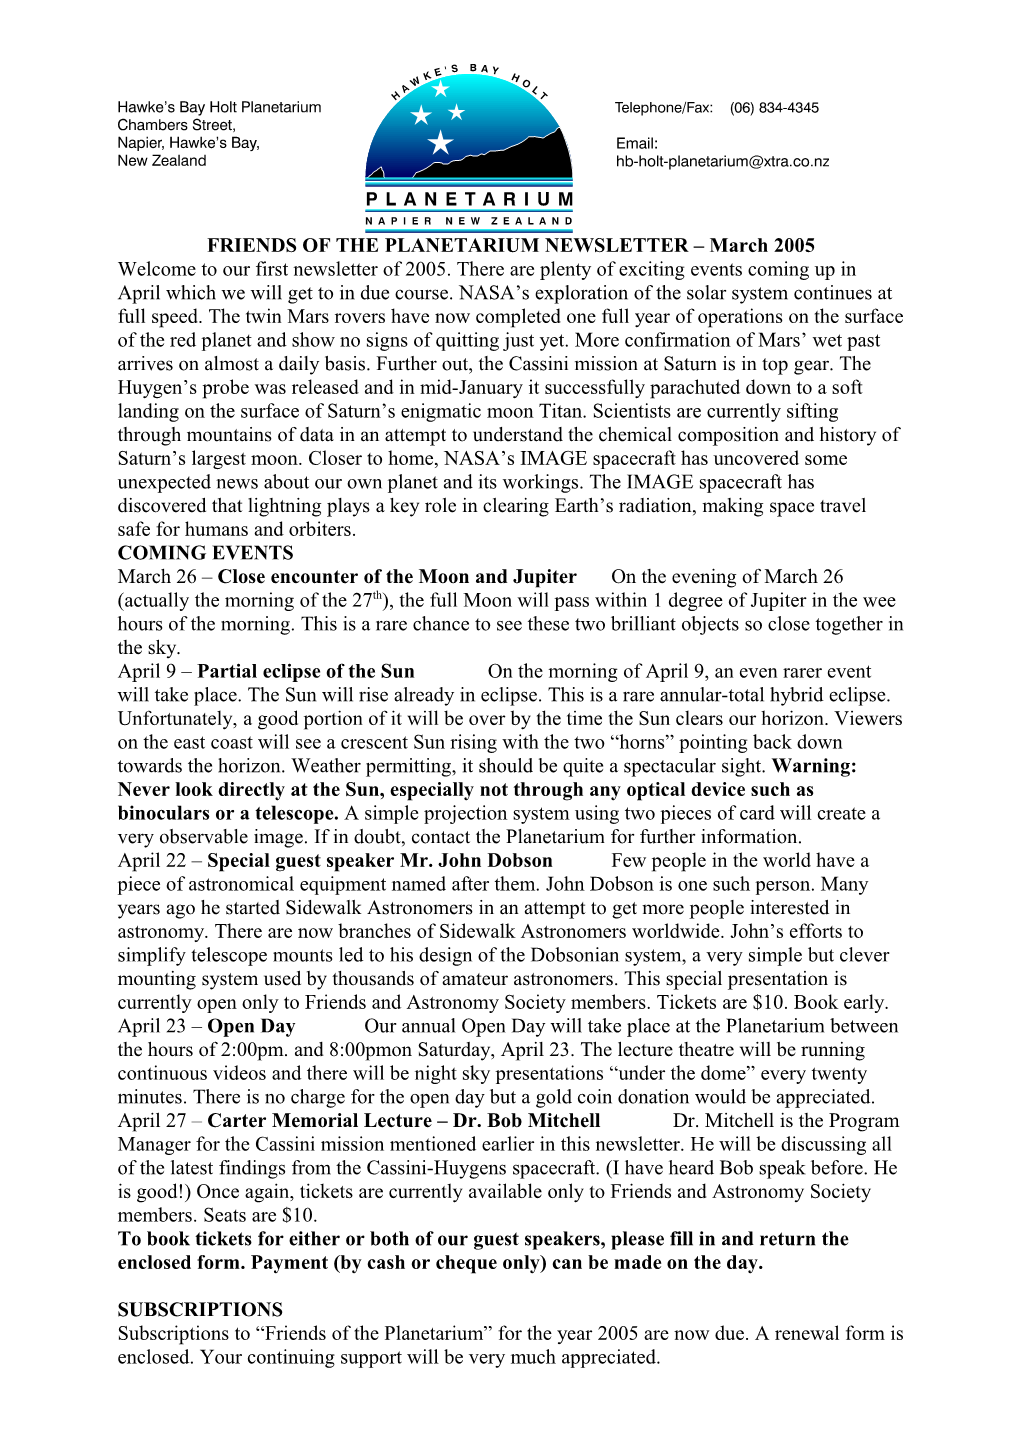 FRIENDS of the PLANETARIUM NEWSLETTER March 2005